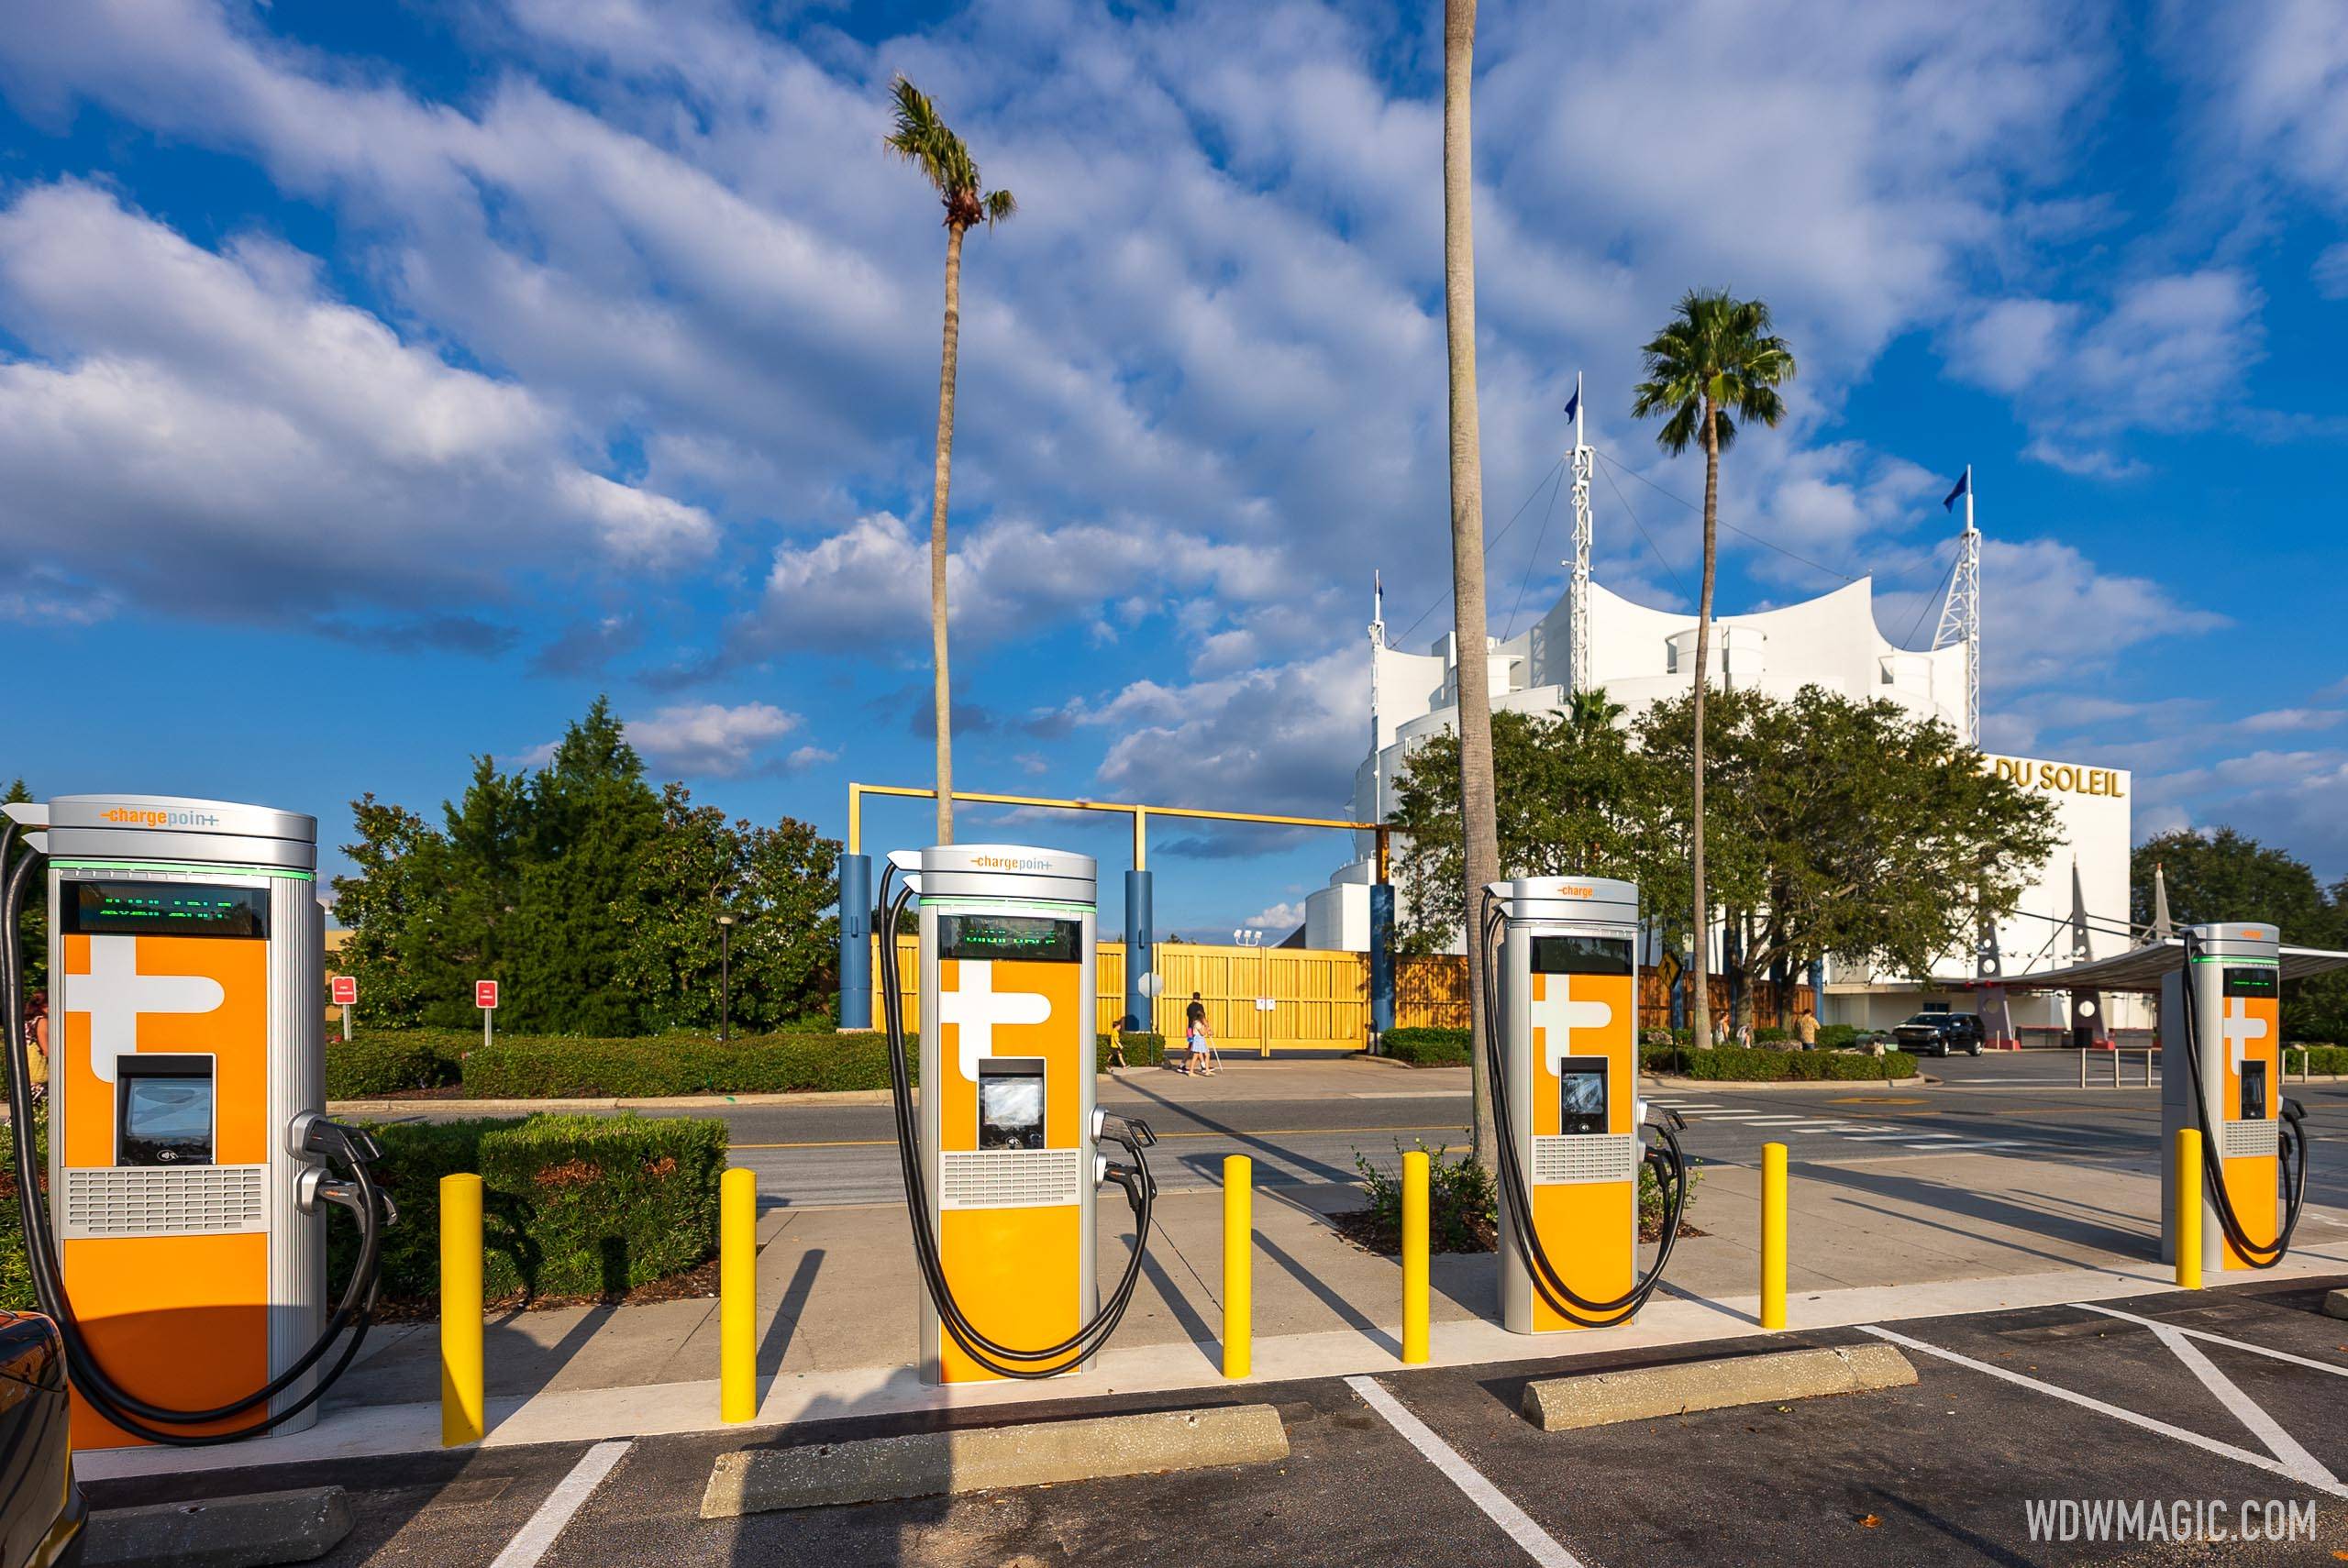 Level 3 DC fast charging for Electric Vehicles arrives at Walt Disney World